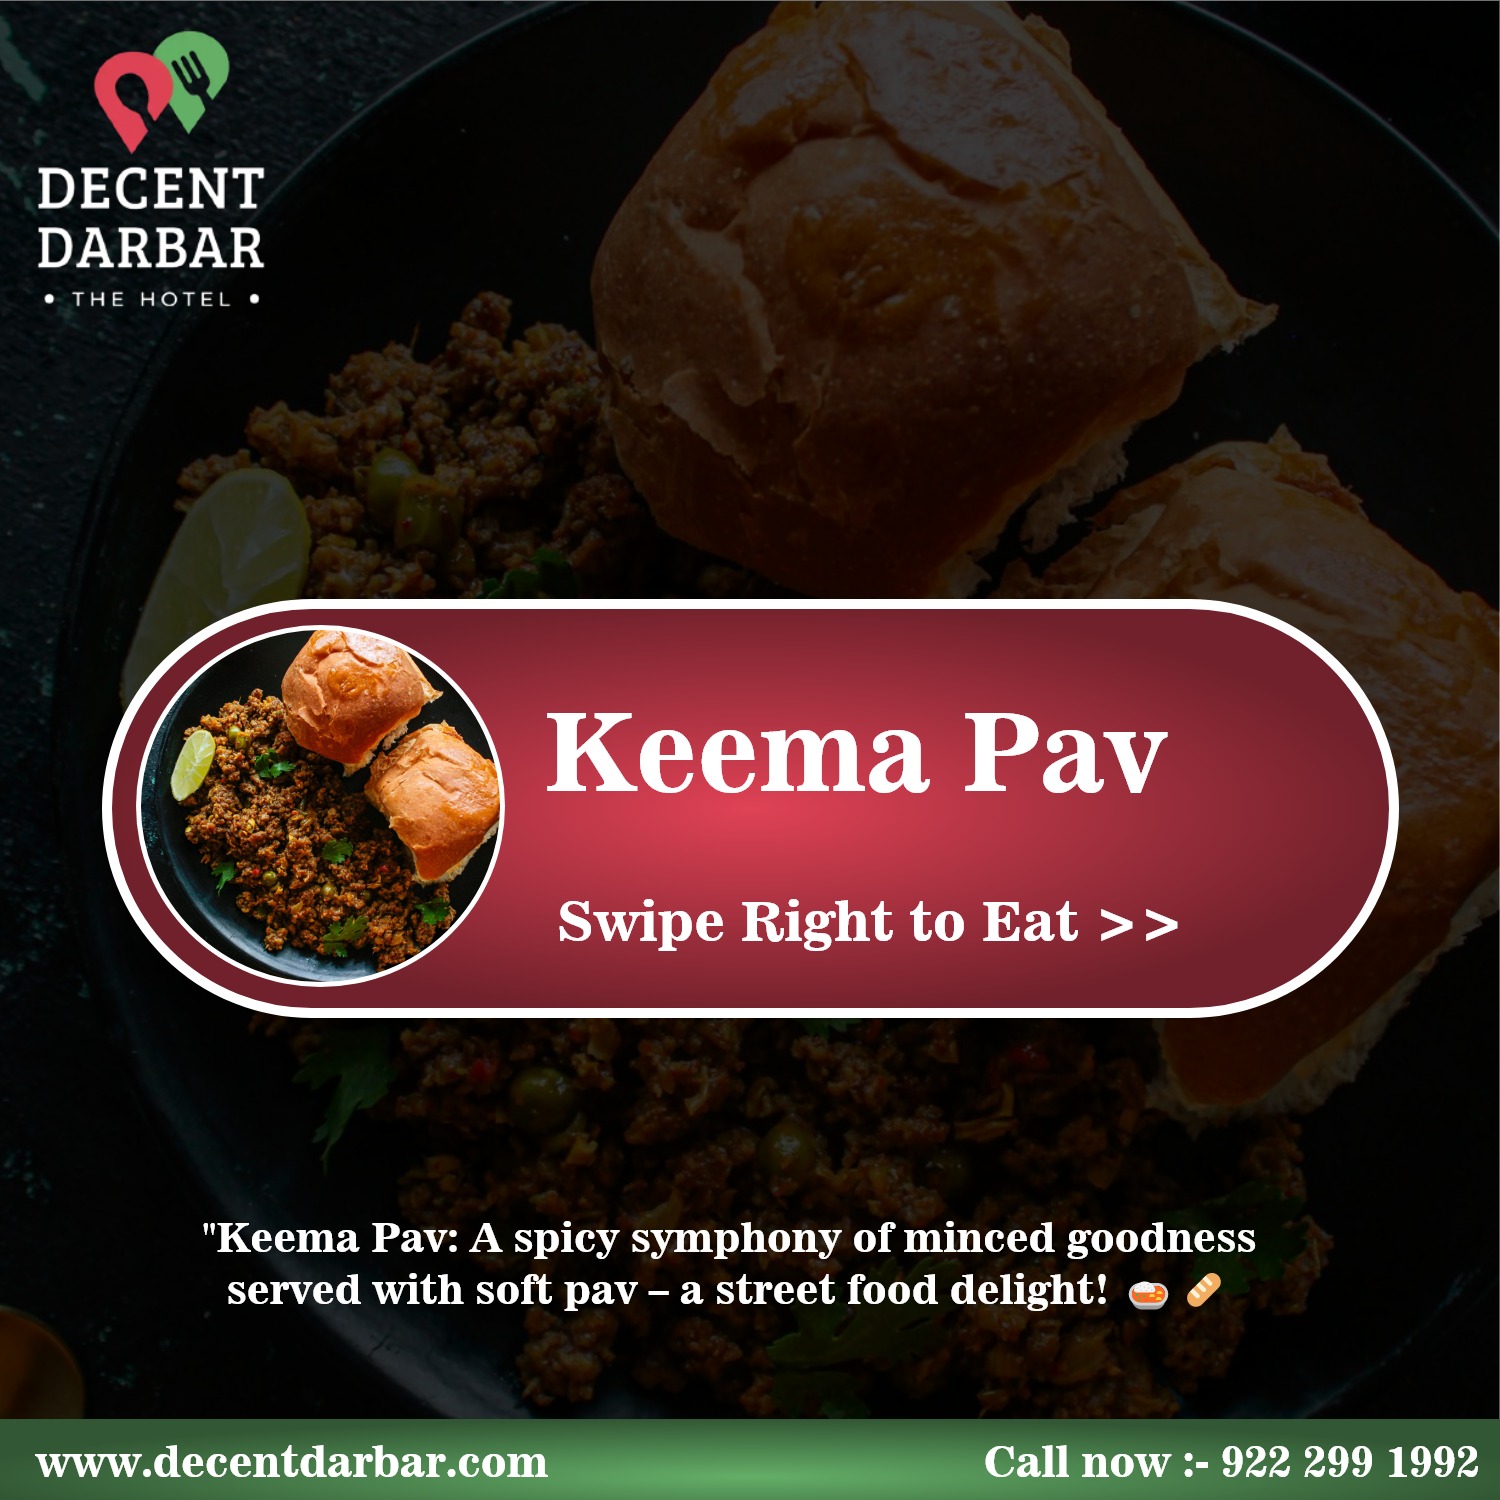 Indulge in Delicious Keema Pav at Our Hotel